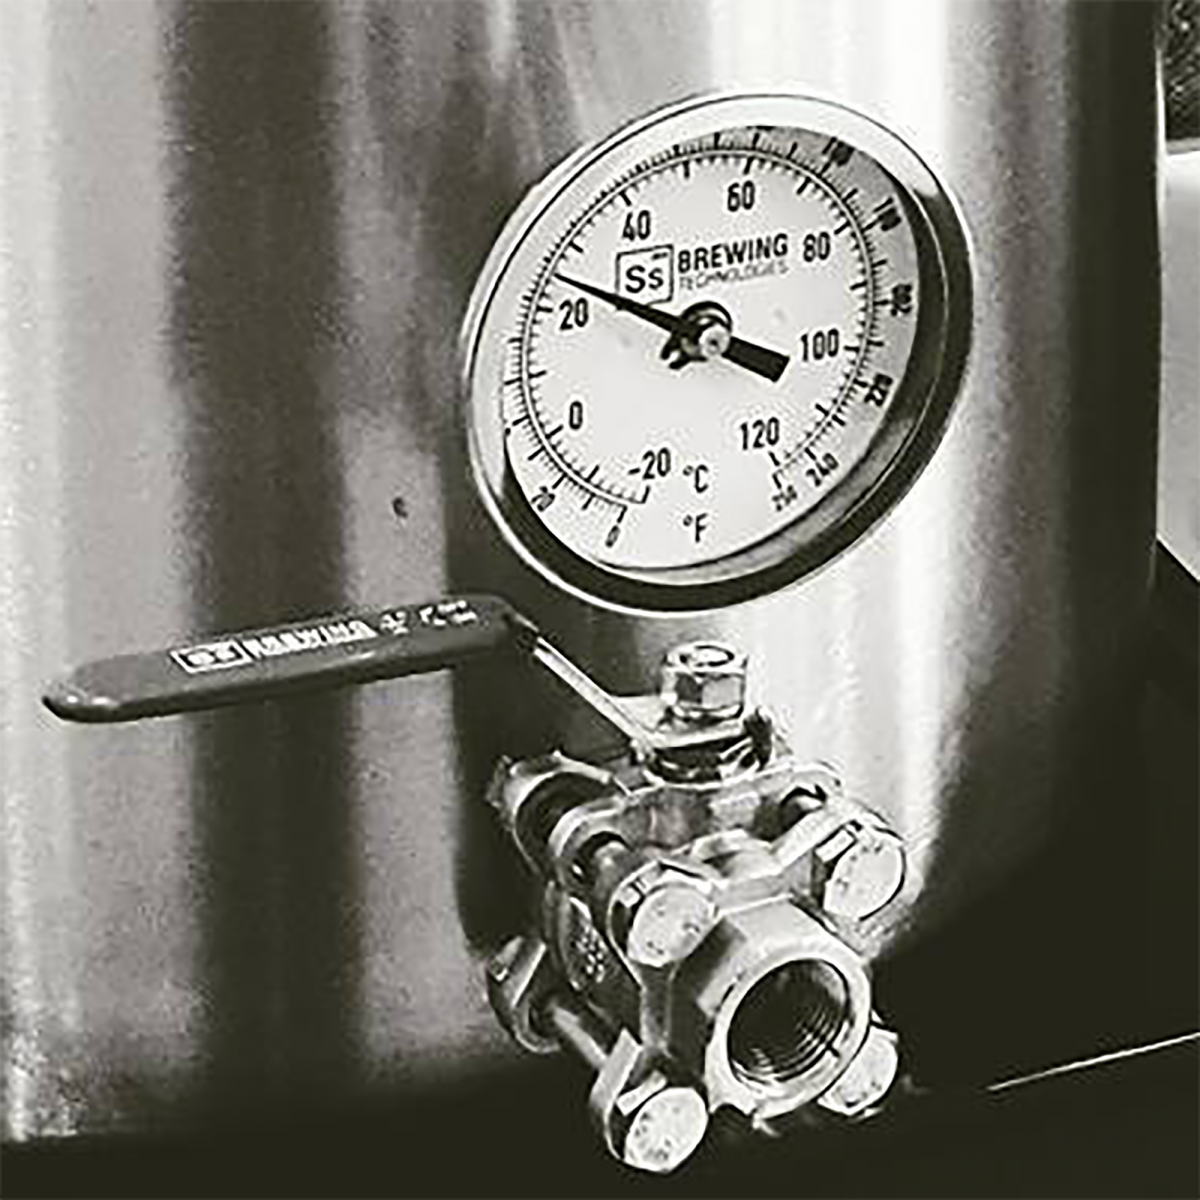 Ss Brewtech™ Thermometer (with Ss logo) for Brew Kettles with 1 bulkhead